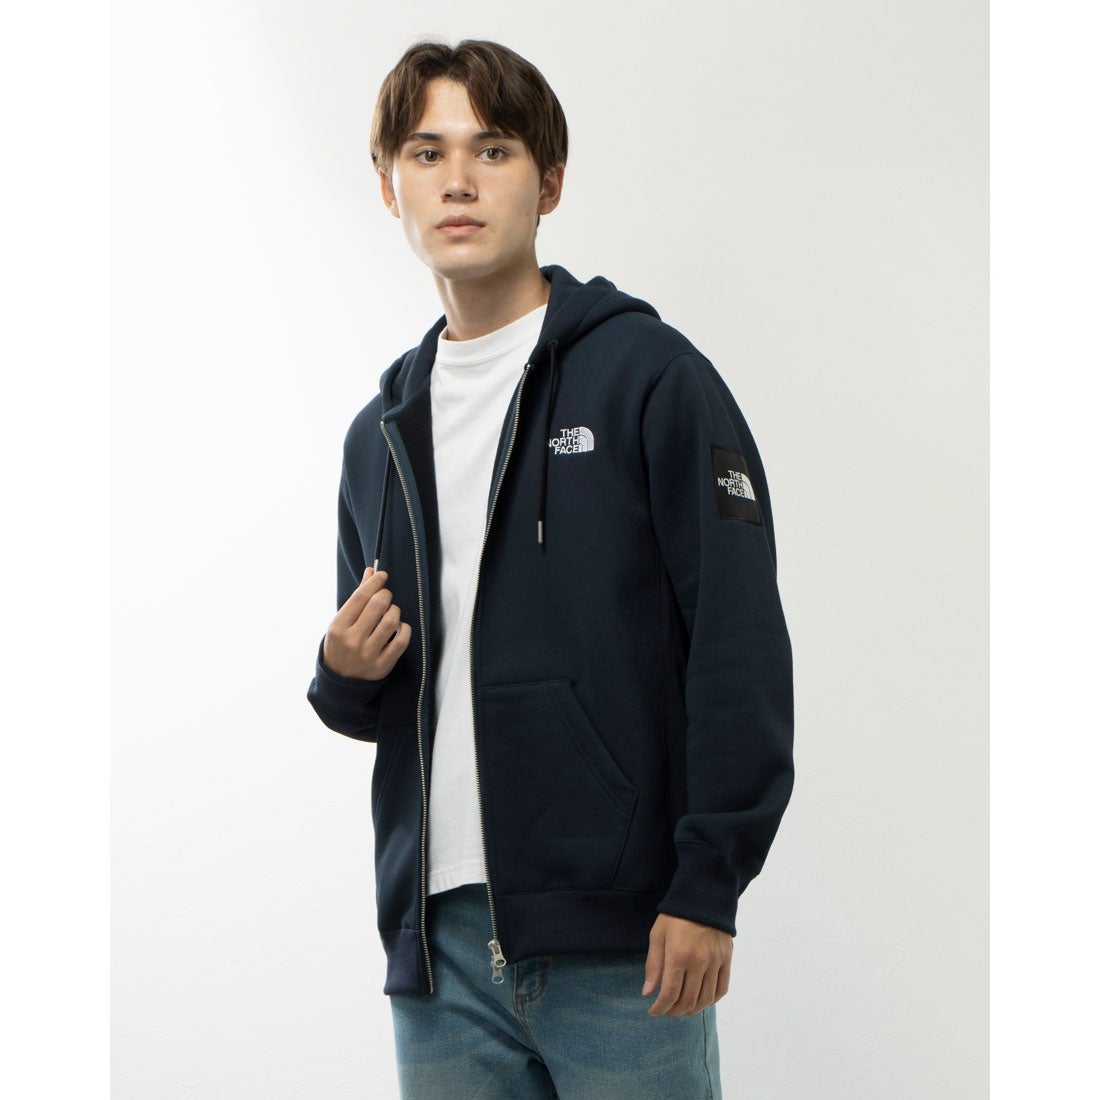 THE NORTH FACE Square Logo Full Zip